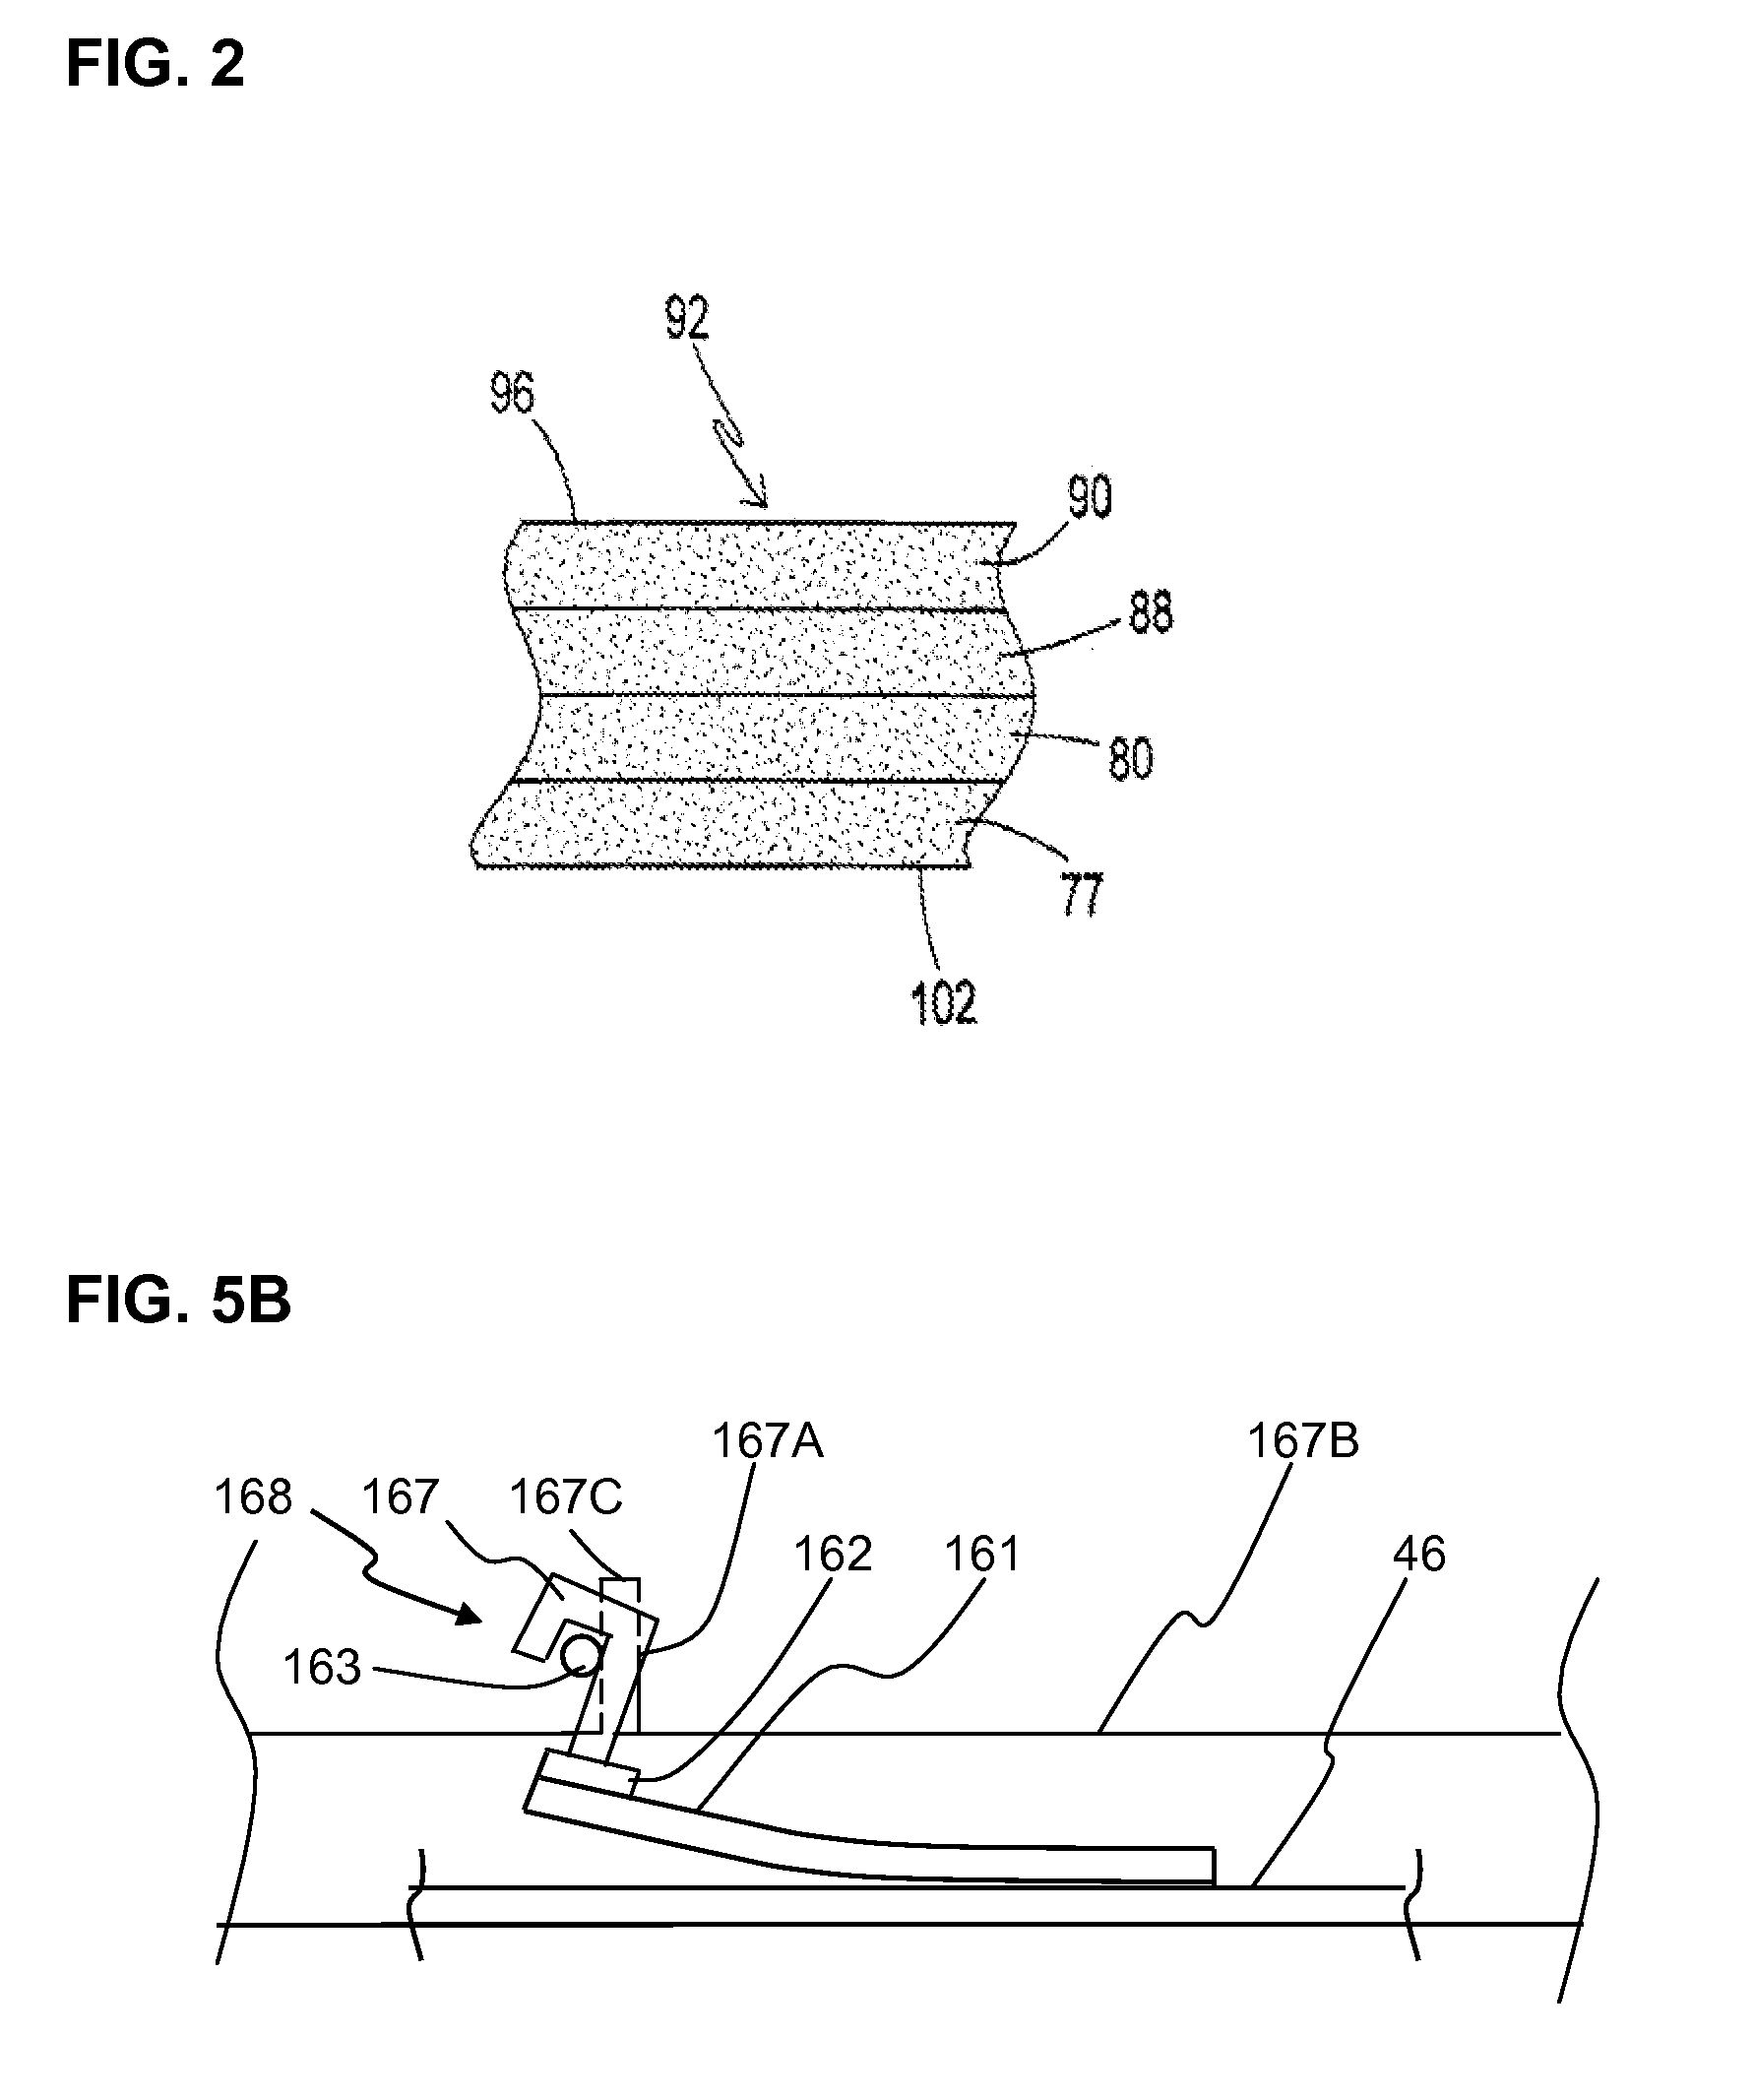 Method for smoothing cementitious slurry in the production of structural cementitious panels